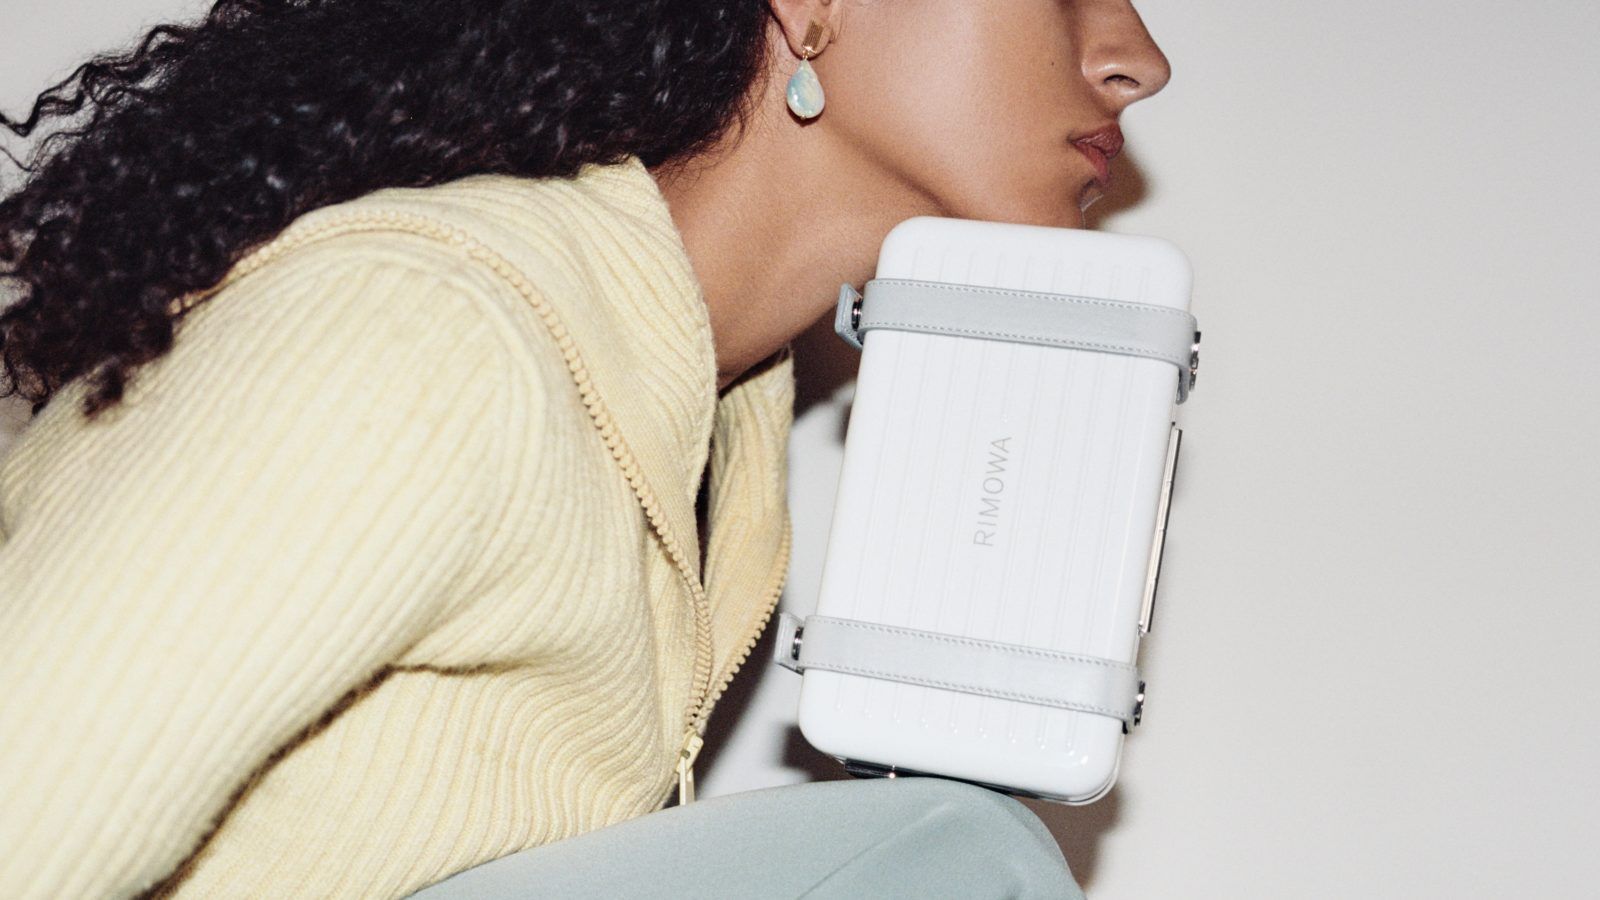 The Personal case finds a spot in Rimowa’s permanent line-up